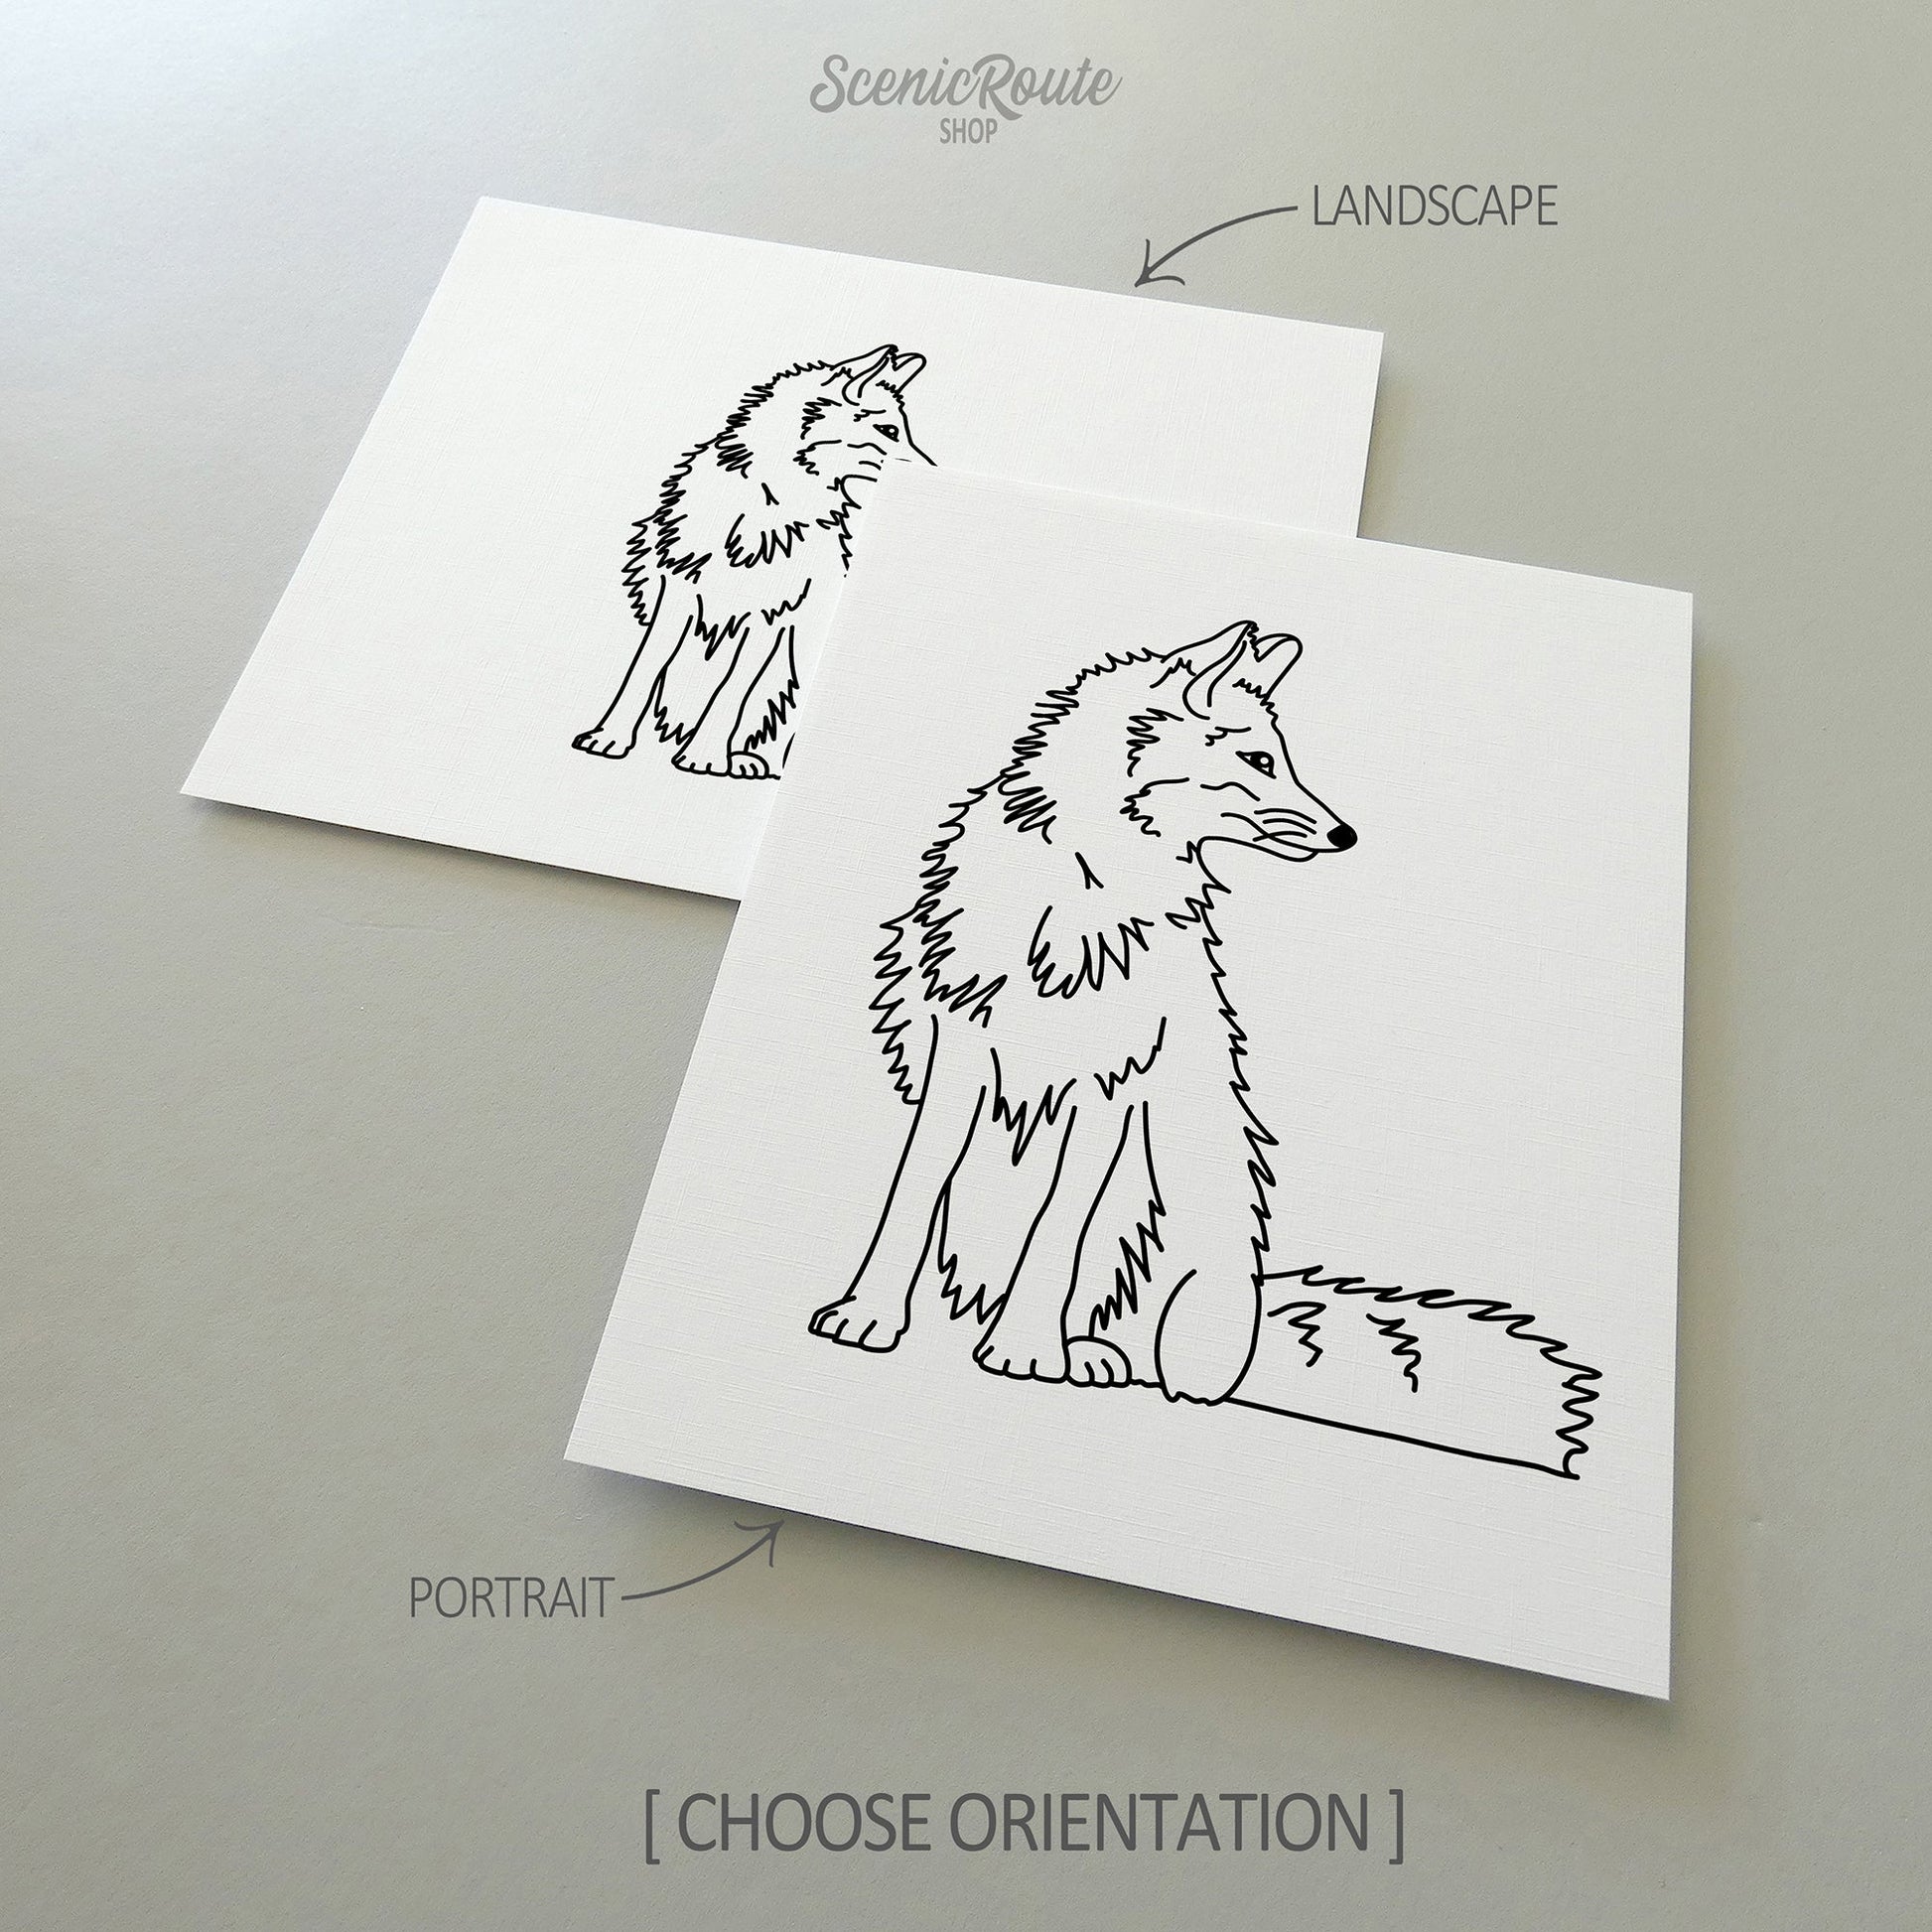 Two line art drawings of a Fox on white linen paper with a gray background.  The pieces are shown in portrait and landscape orientation for the available art print options.